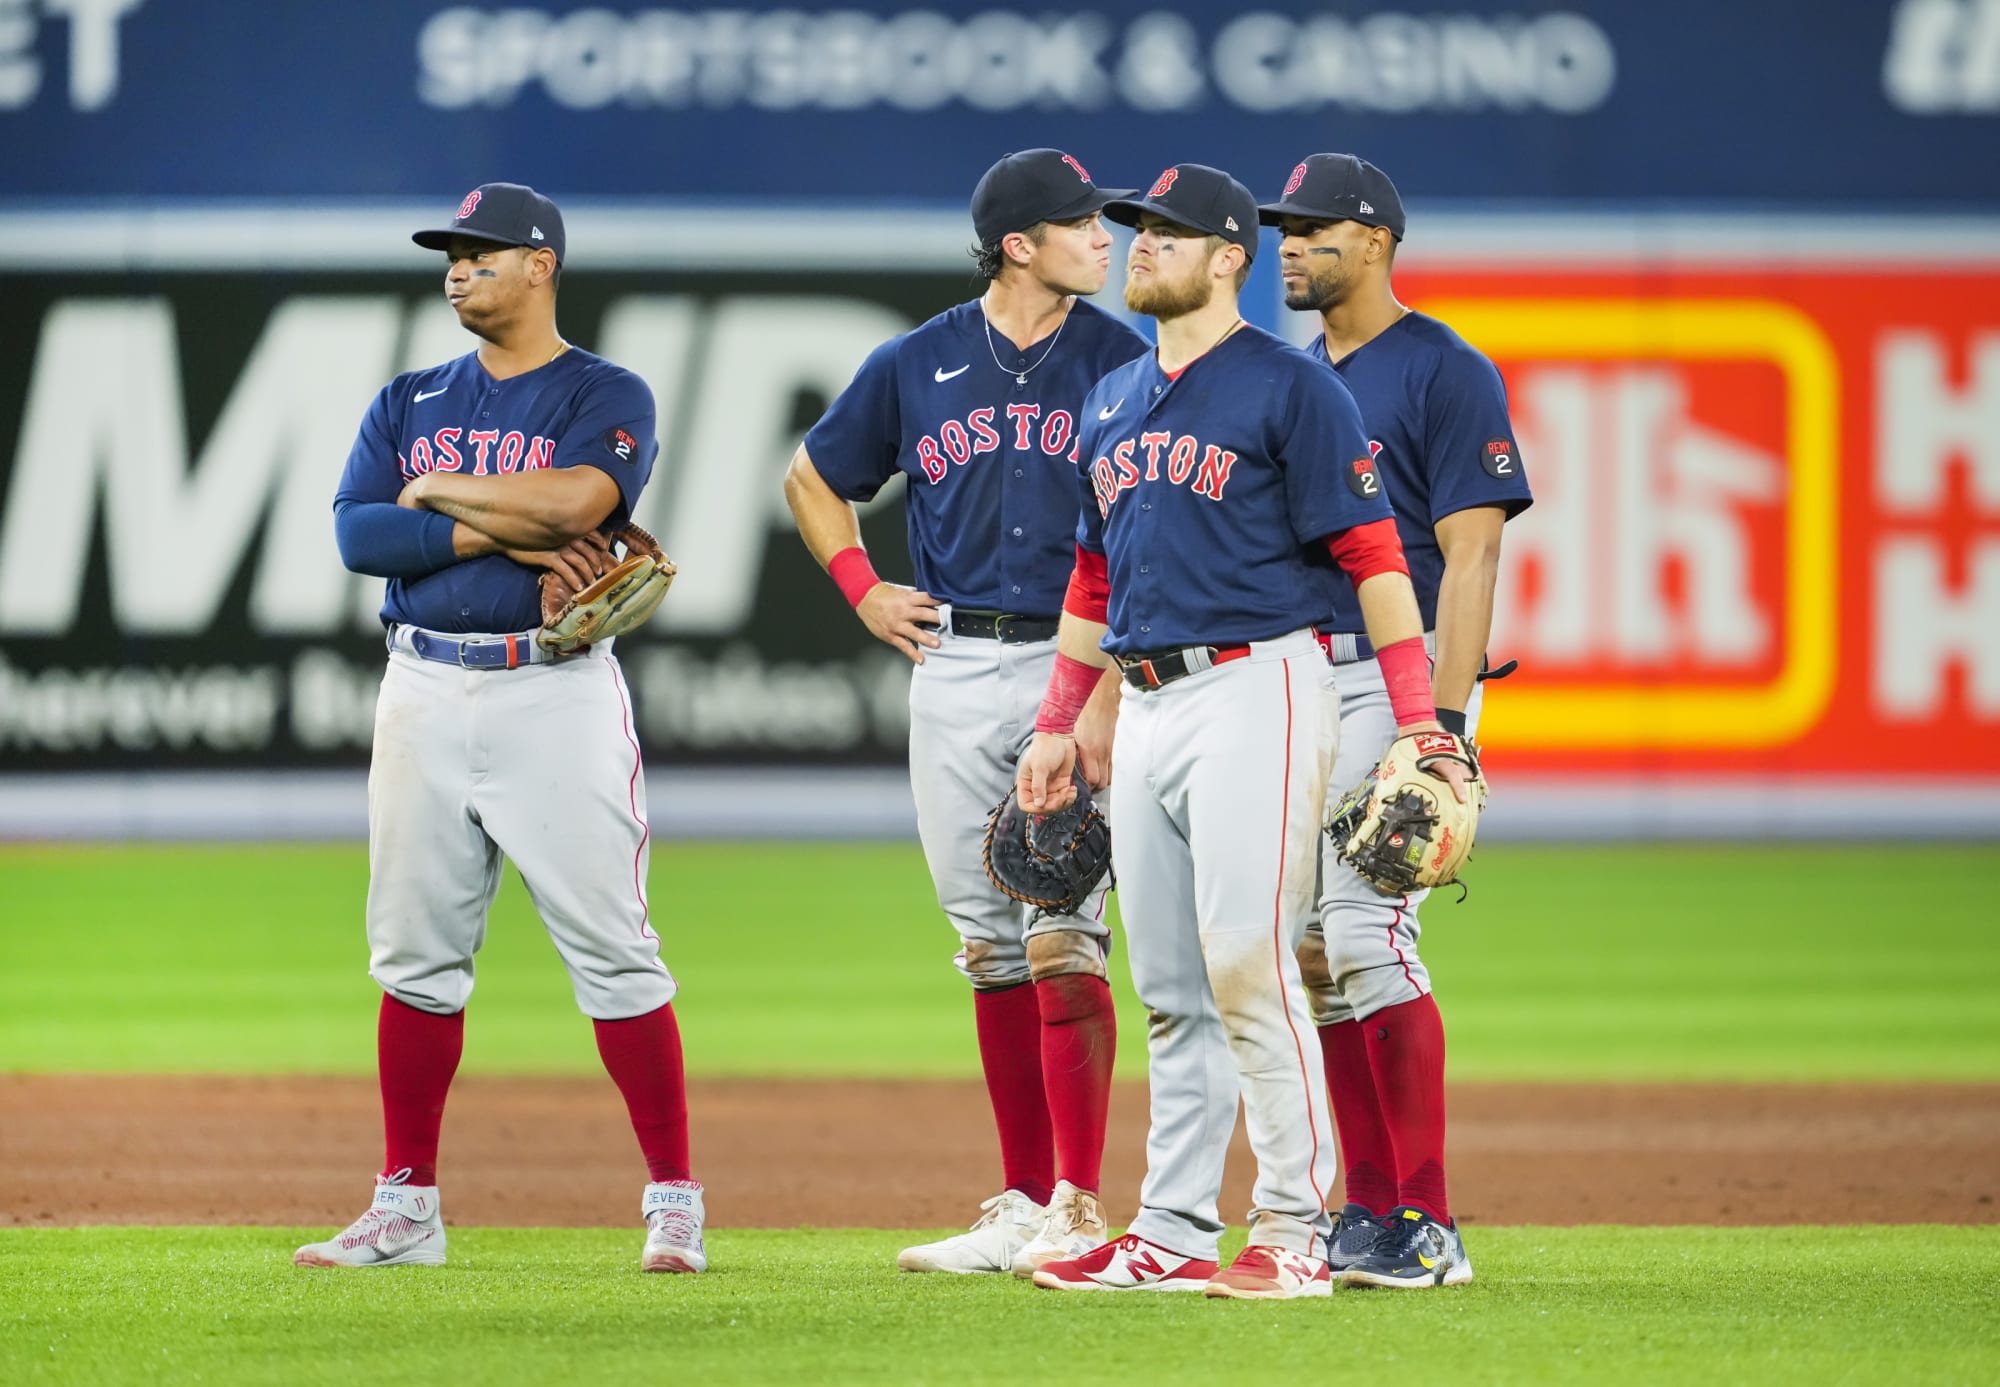 Boston Red Sox latest loss to Toronto shows they are beating themselves